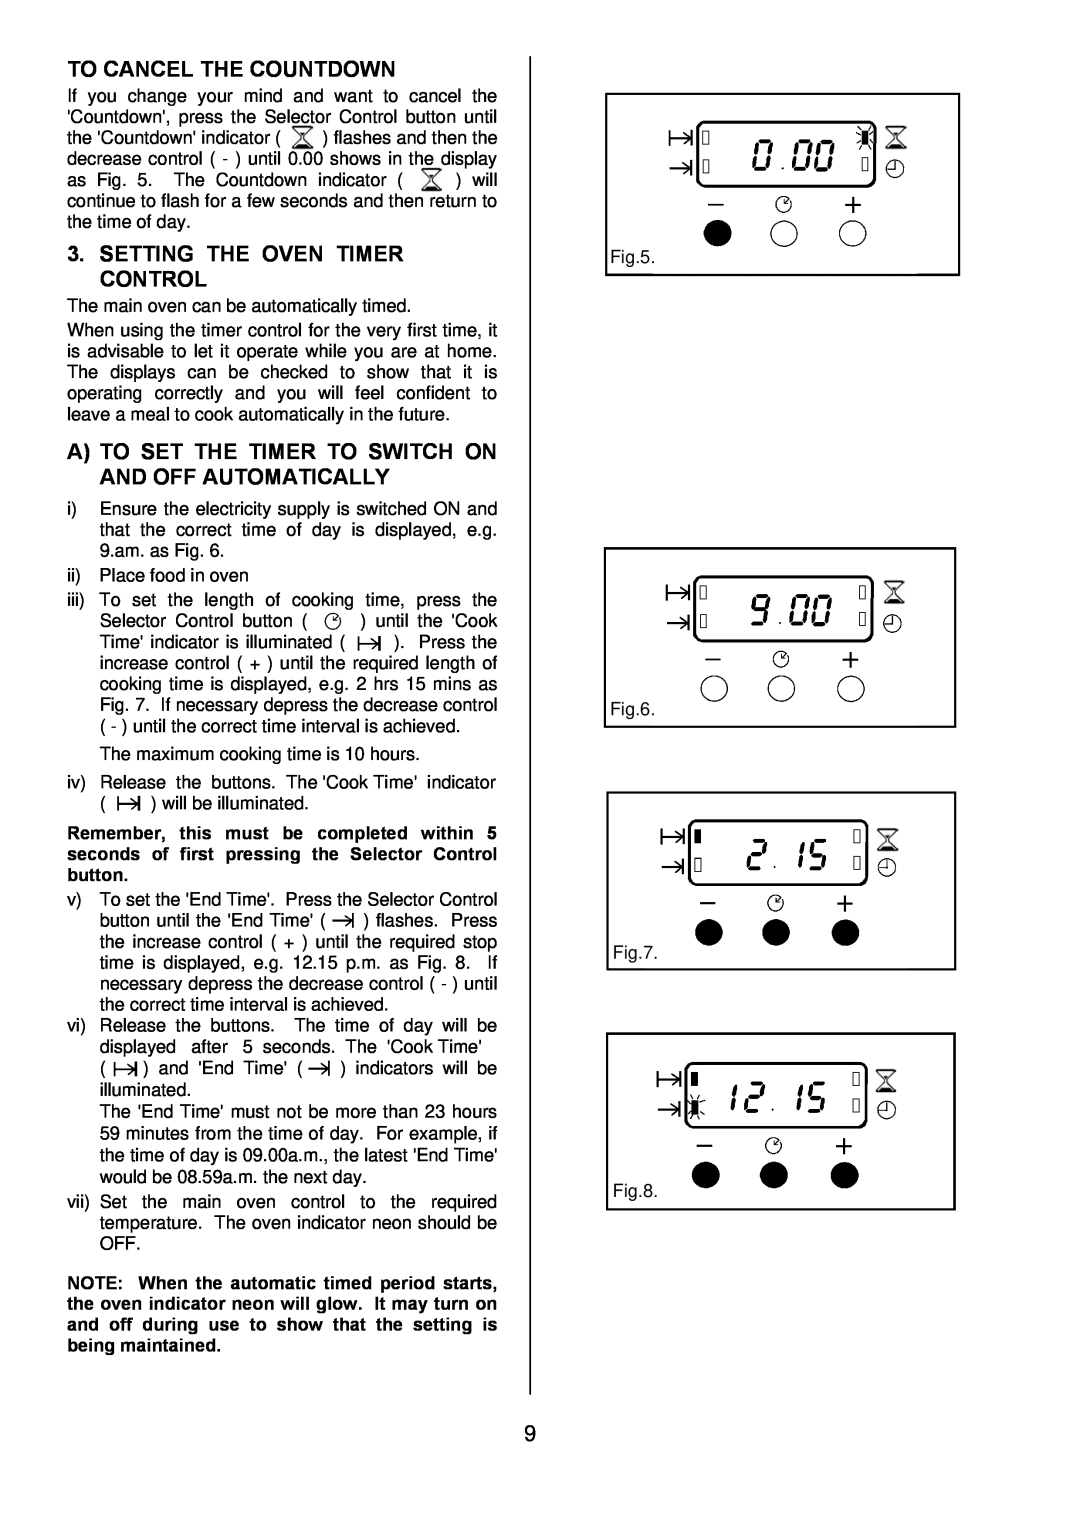 Zanussi ZDF 290 manual To Cancel The Countdown, Setting The Oven Timer Control 